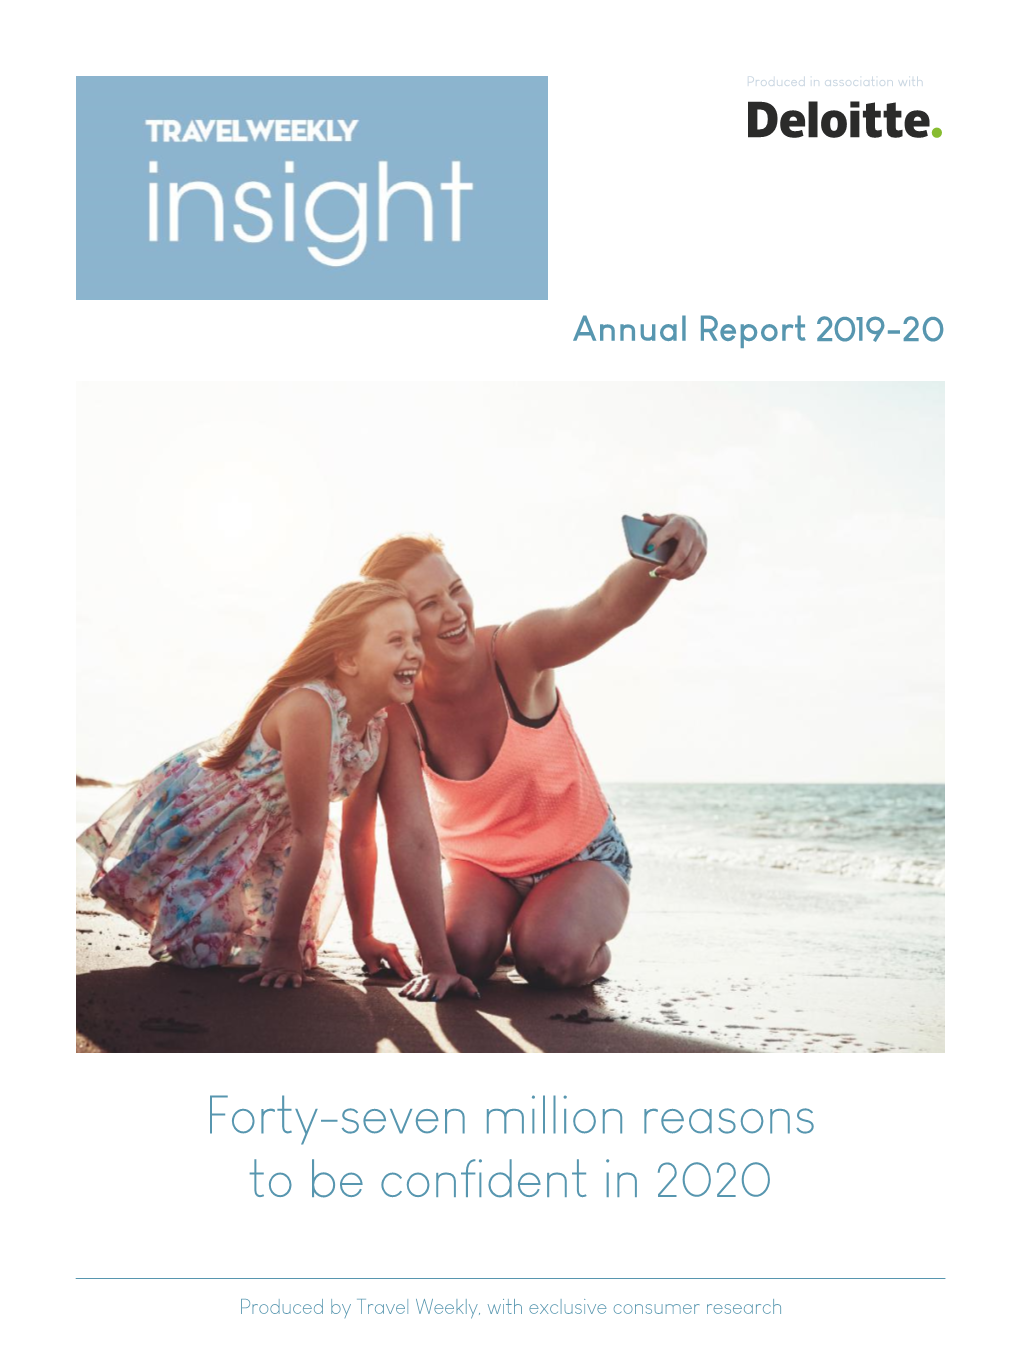 Travel Weekly Insight Annual Report 2019-2020